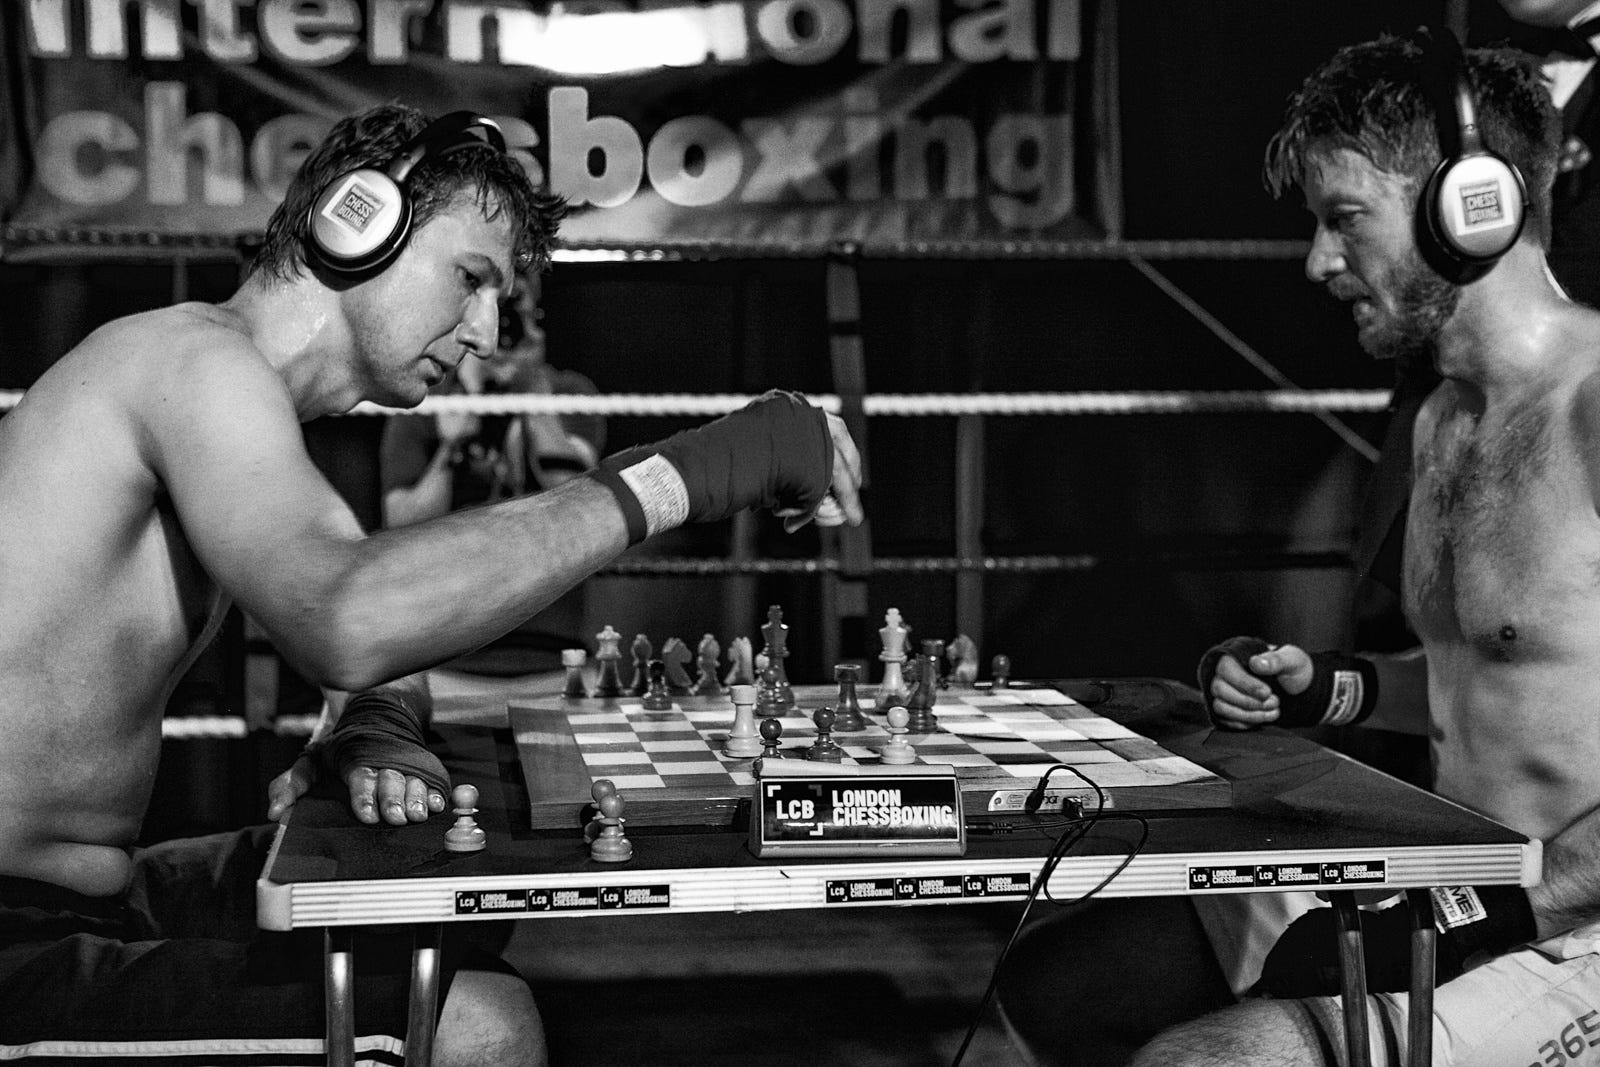 The word Chessboxing is now in the dictionary! : r/chess